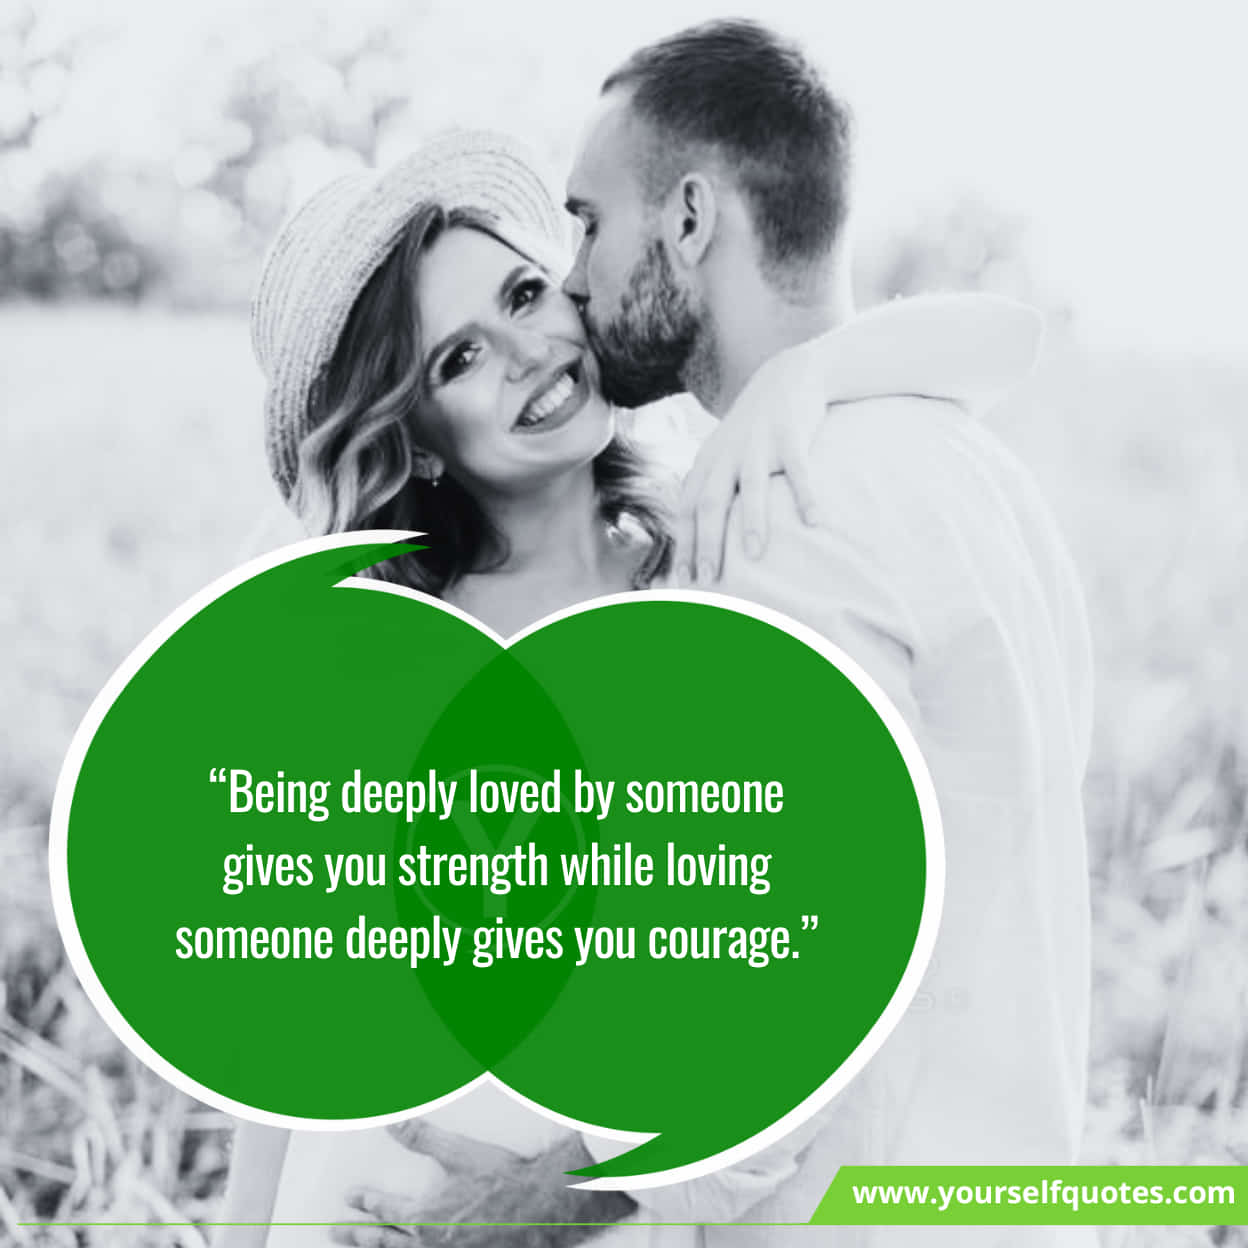 Best Relationship Quotes